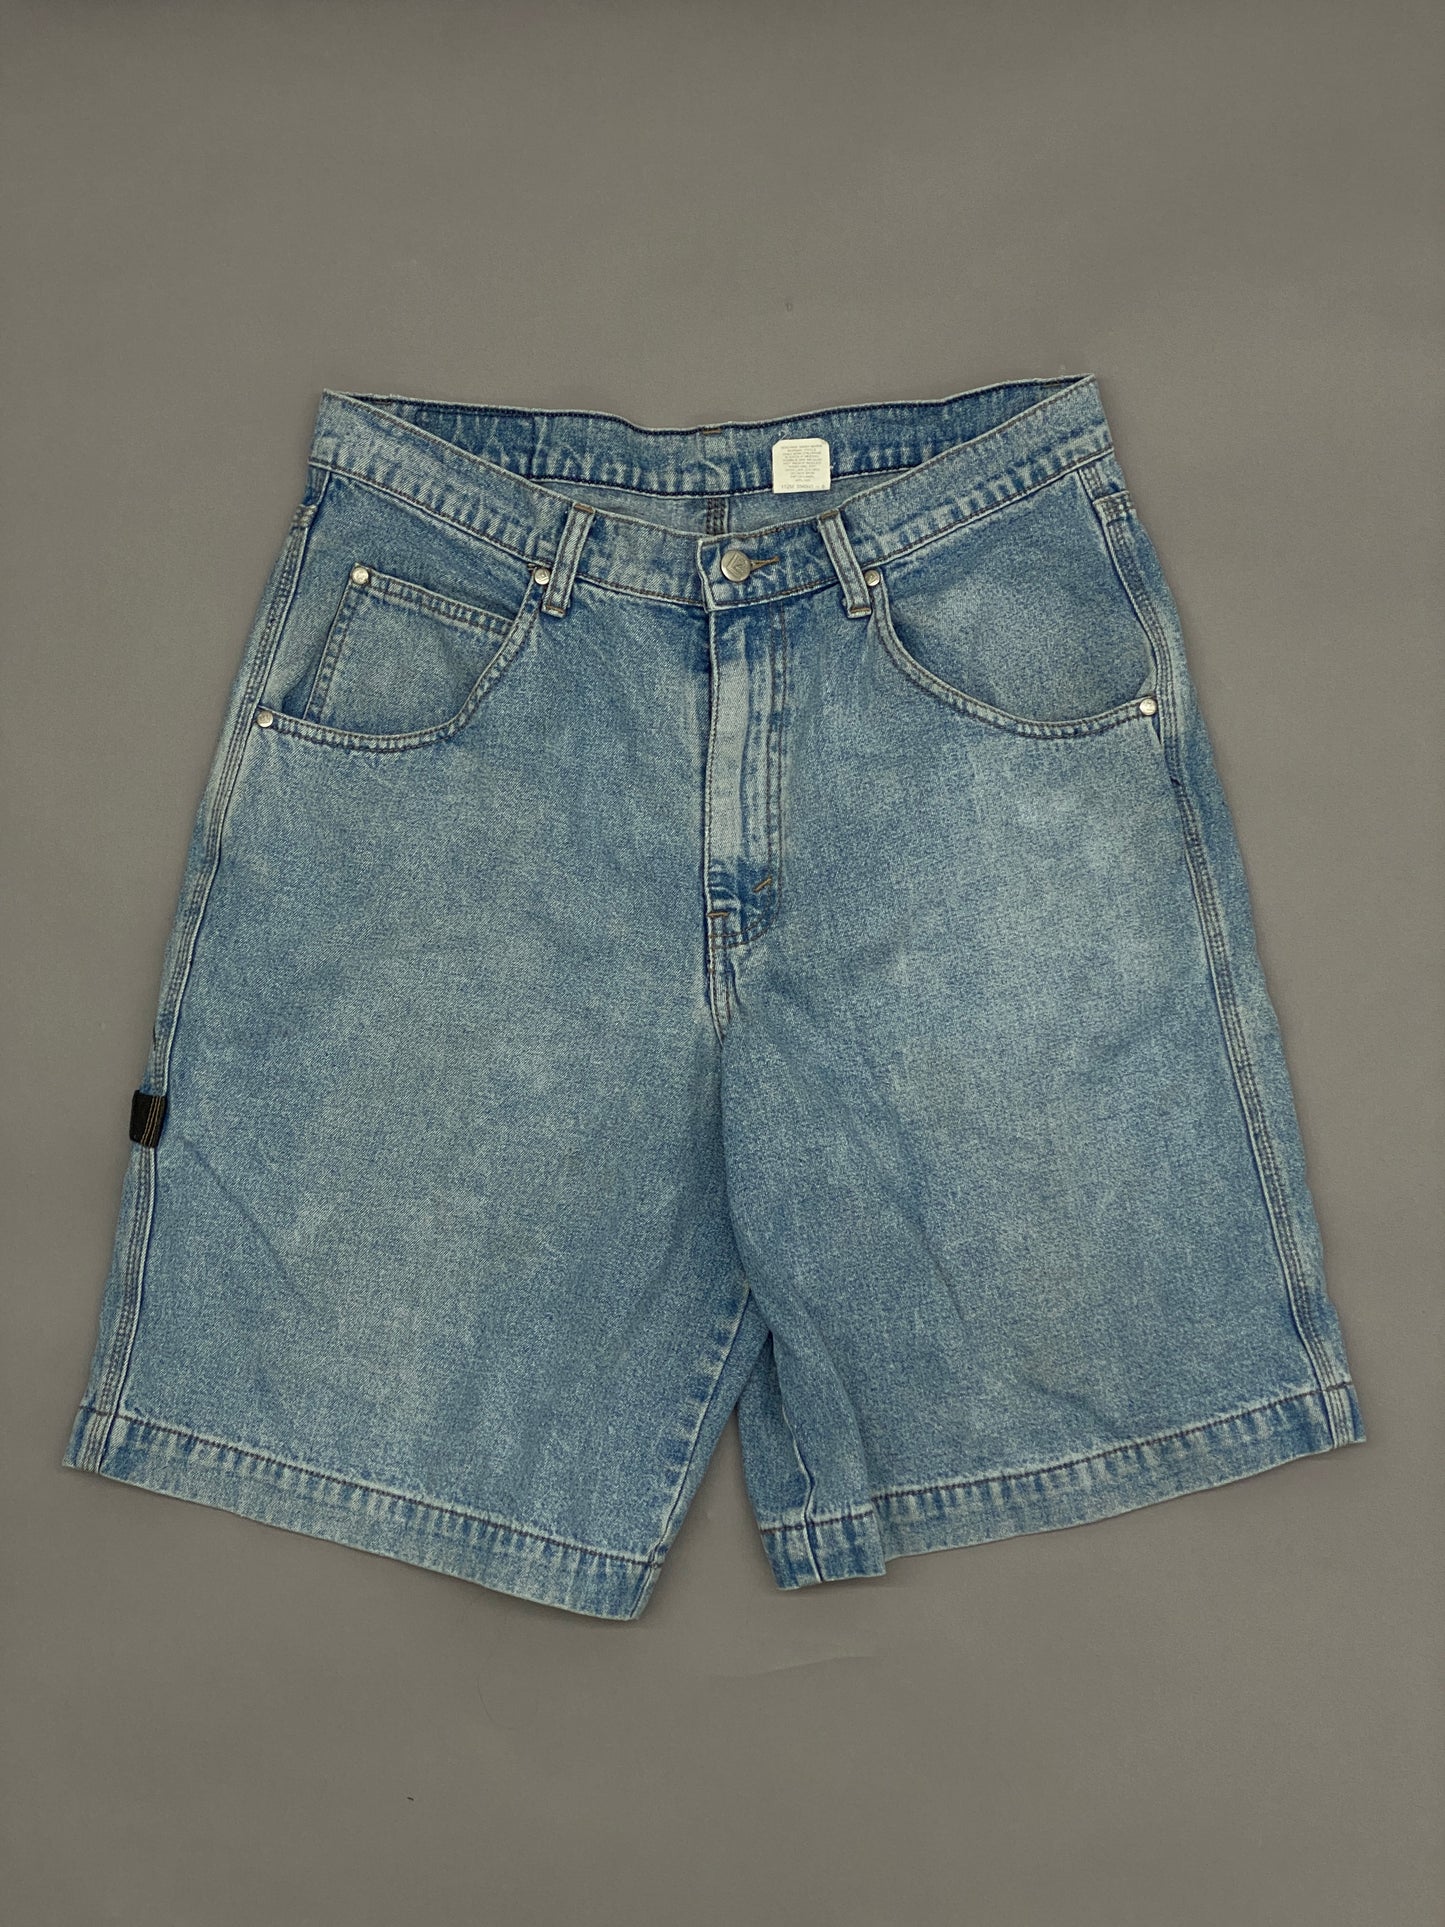 Levis Silver Tab Vintage Baggy Shorts - 32